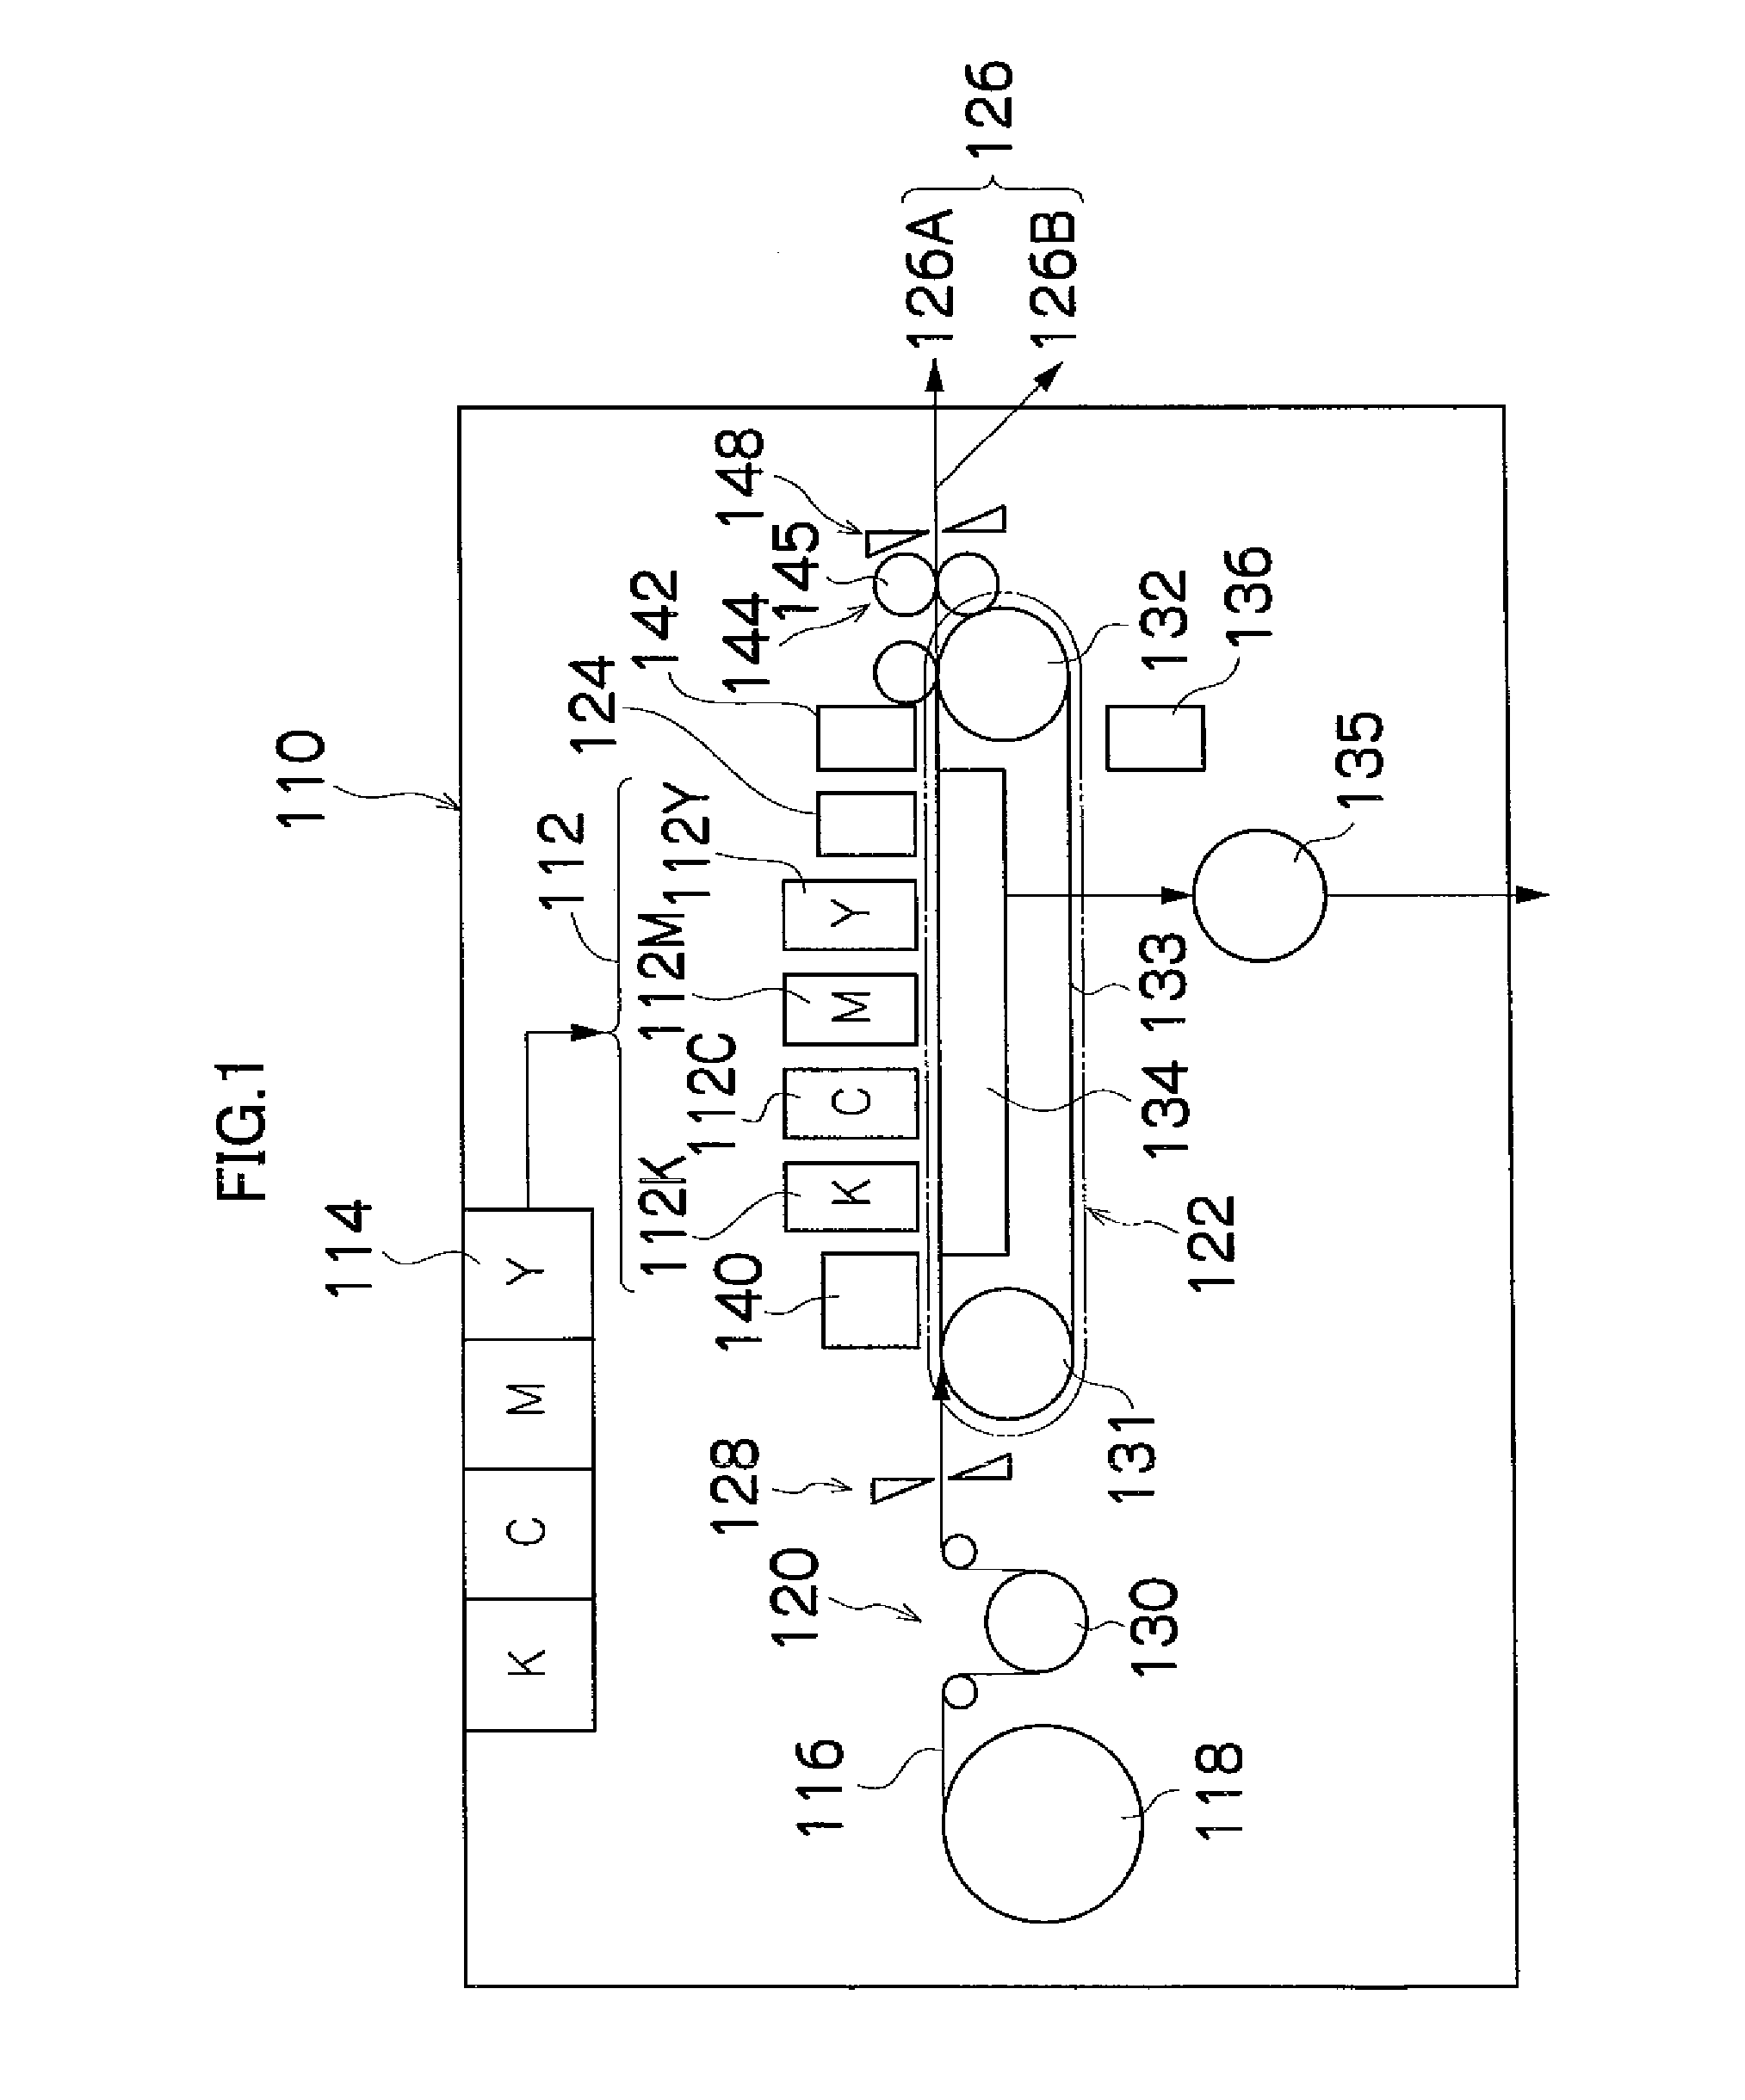 Inkjet image forming method and apparatus, and ink composition therefor